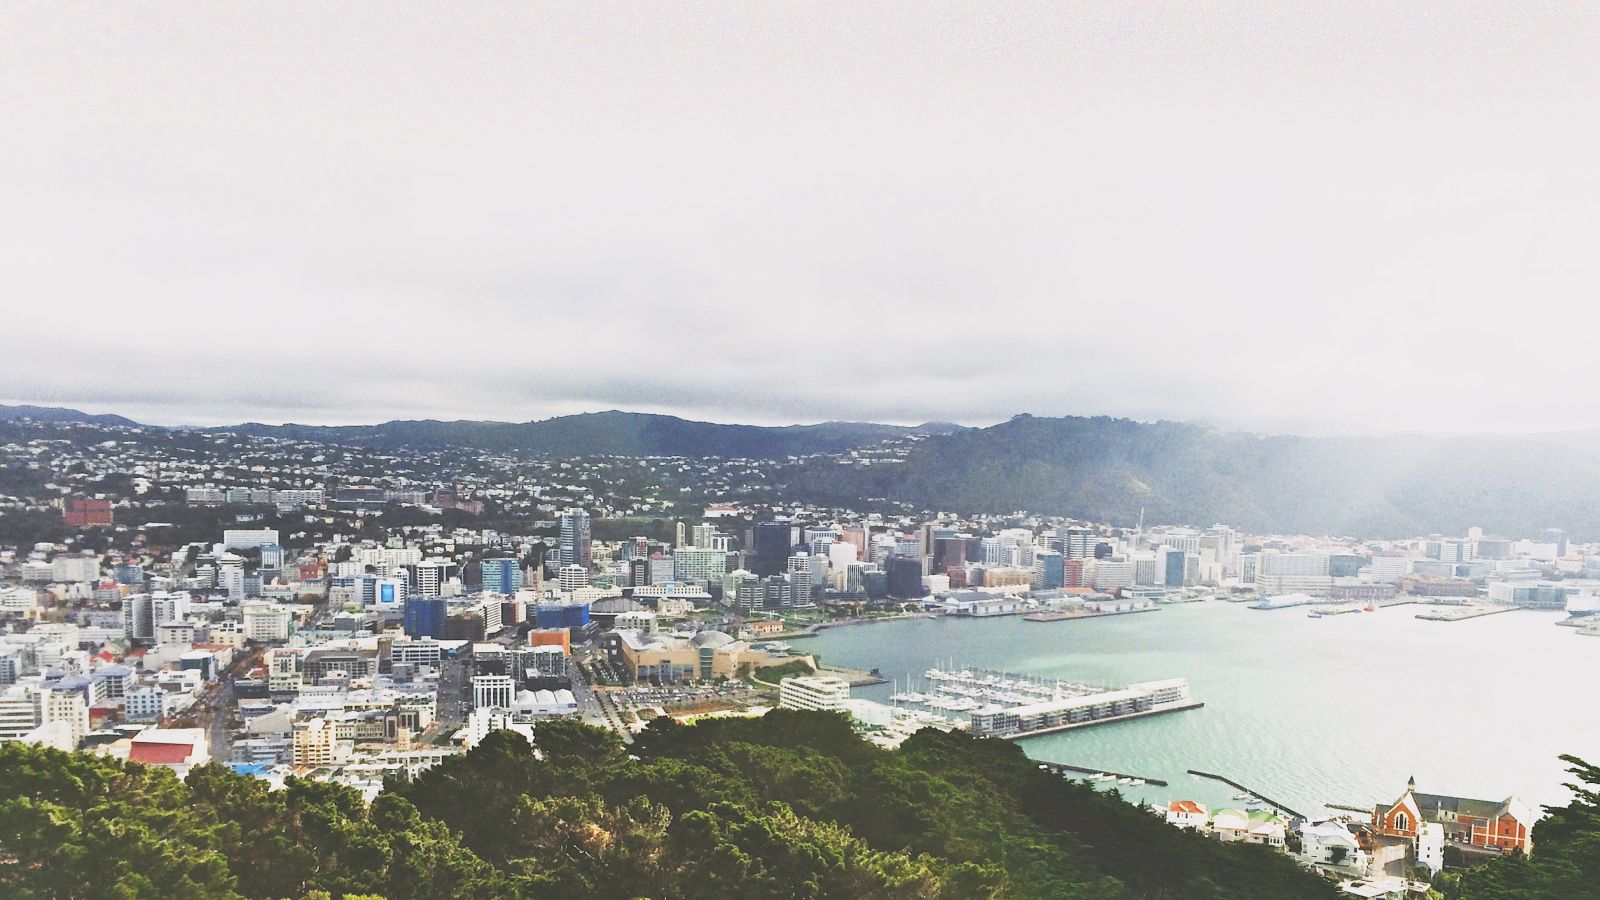 A view of Wellington city taken from Mt. Victoria.